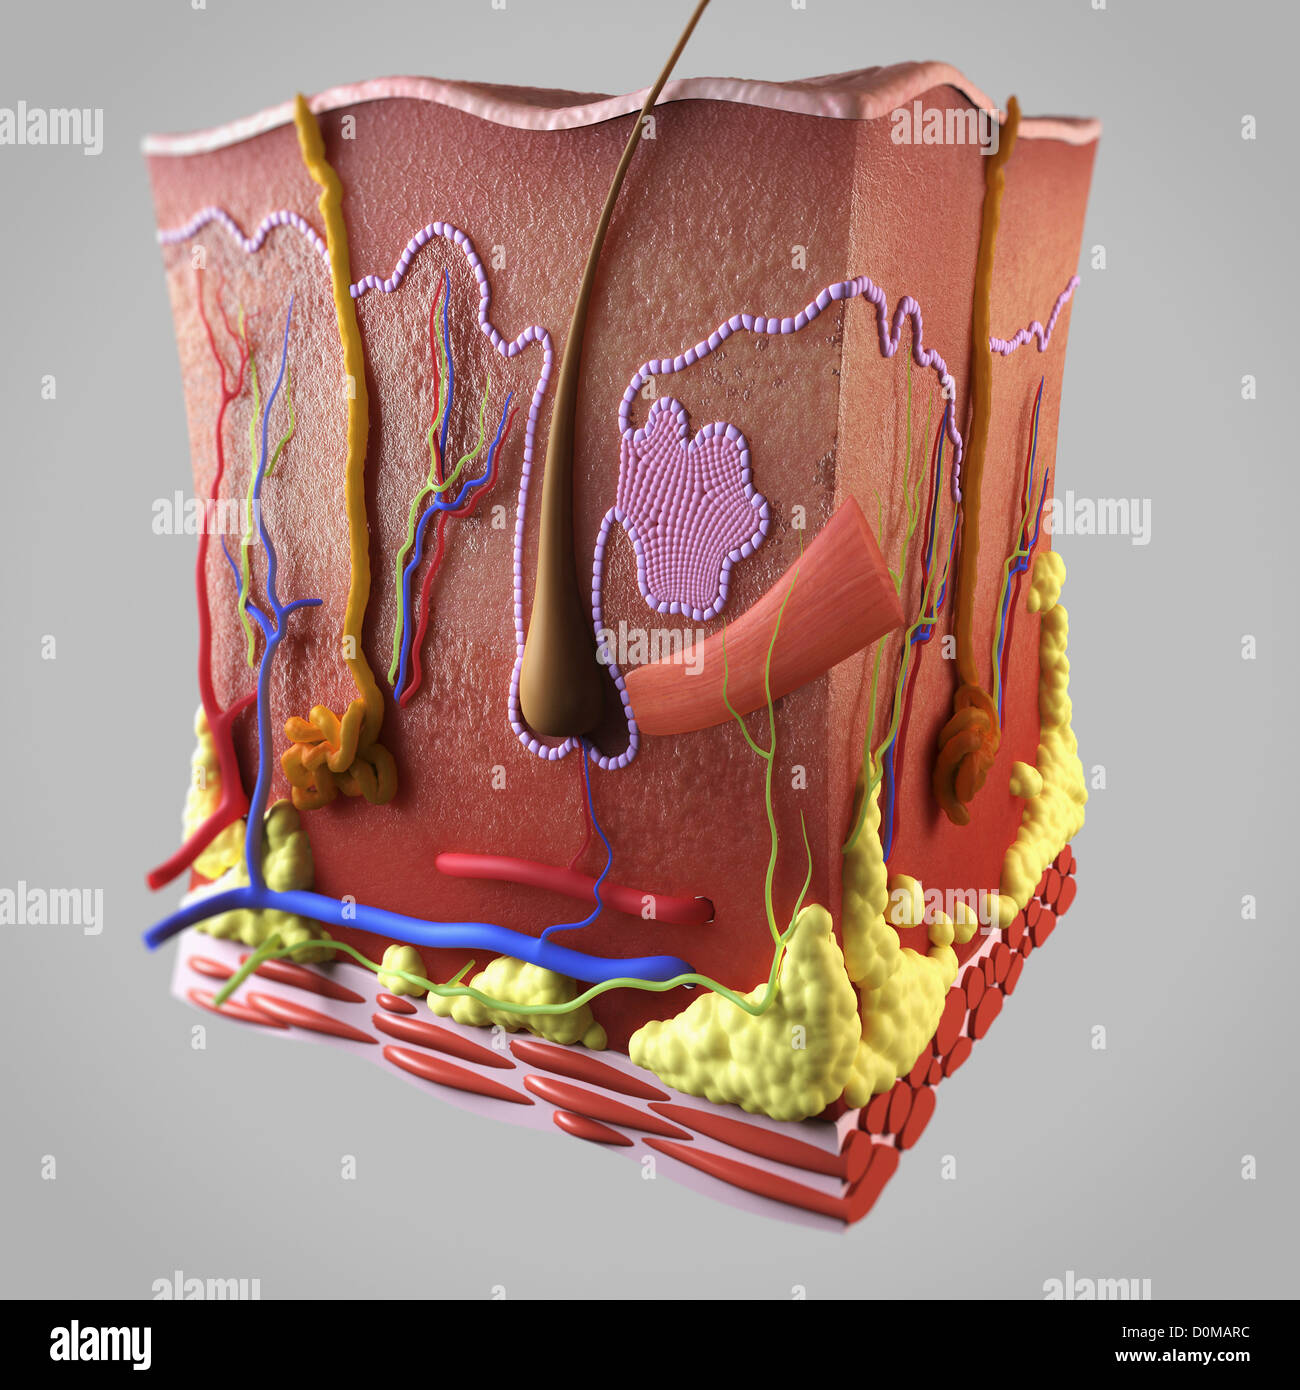 Cross section of skin showing the dermis and subcutis layers. Stock Photo